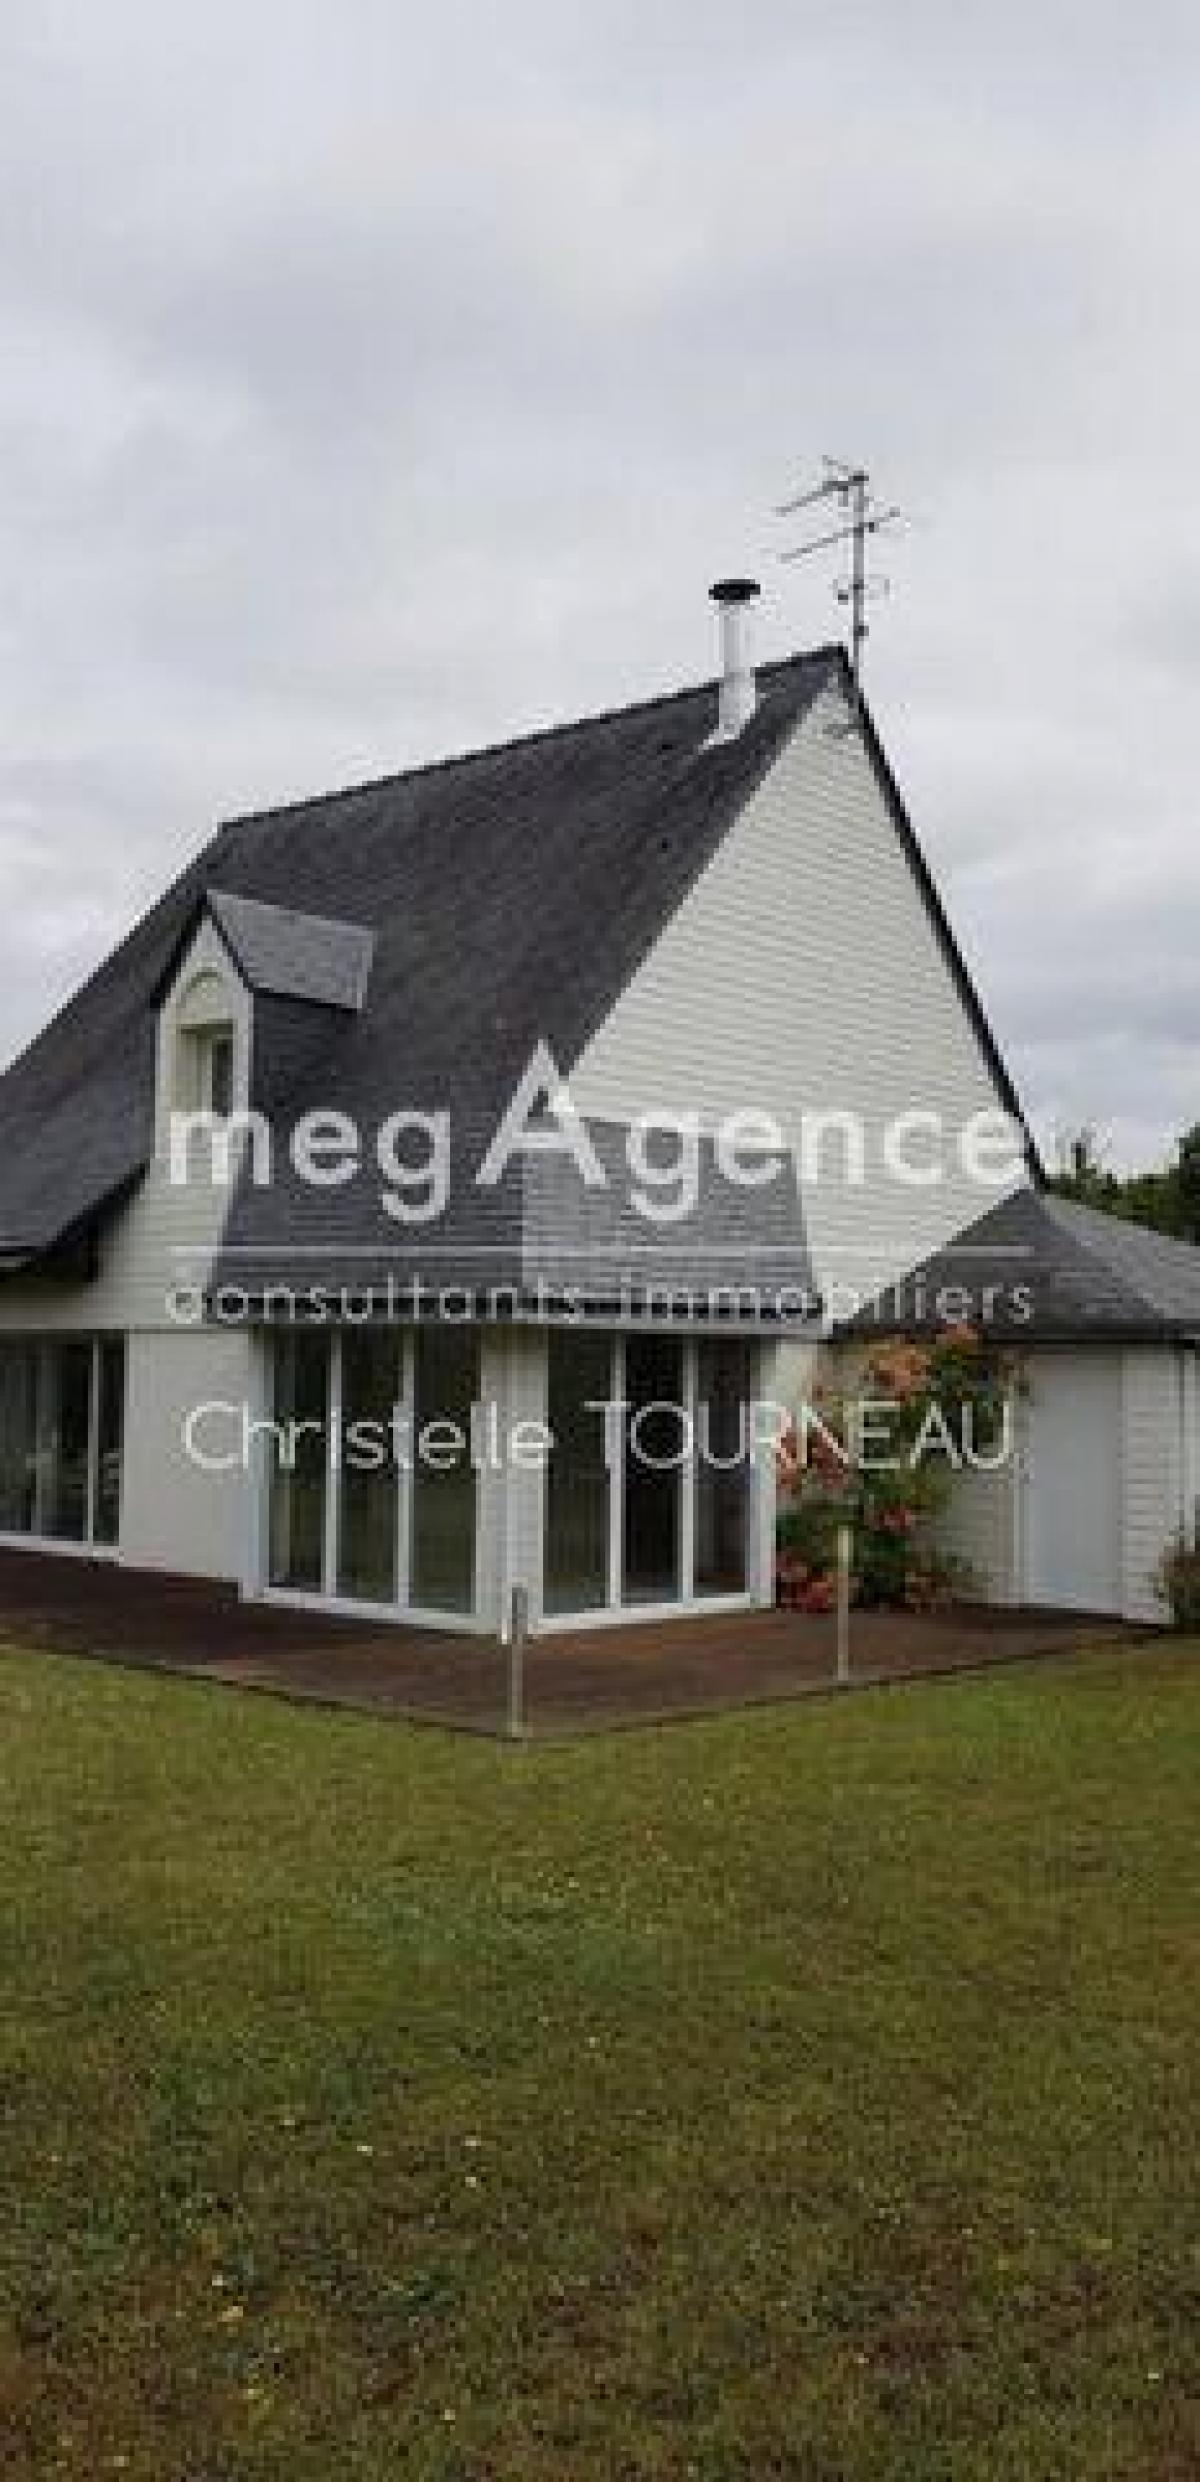 Picture of Home For Sale in Locmariaquer, Bretagne, France